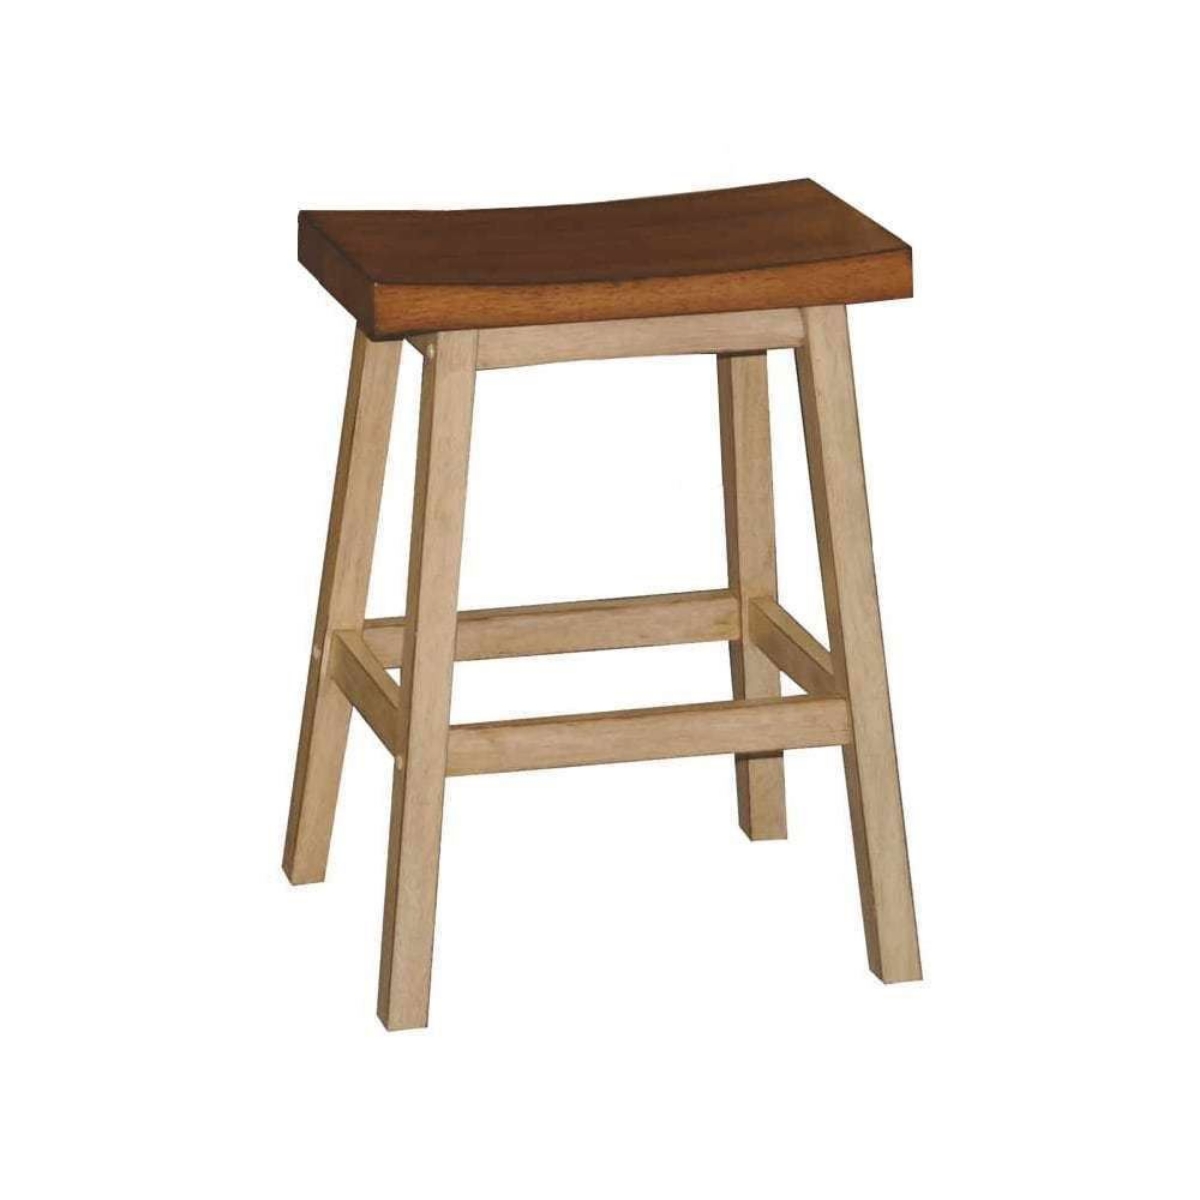 Picture of 24" High Saddle Barstool